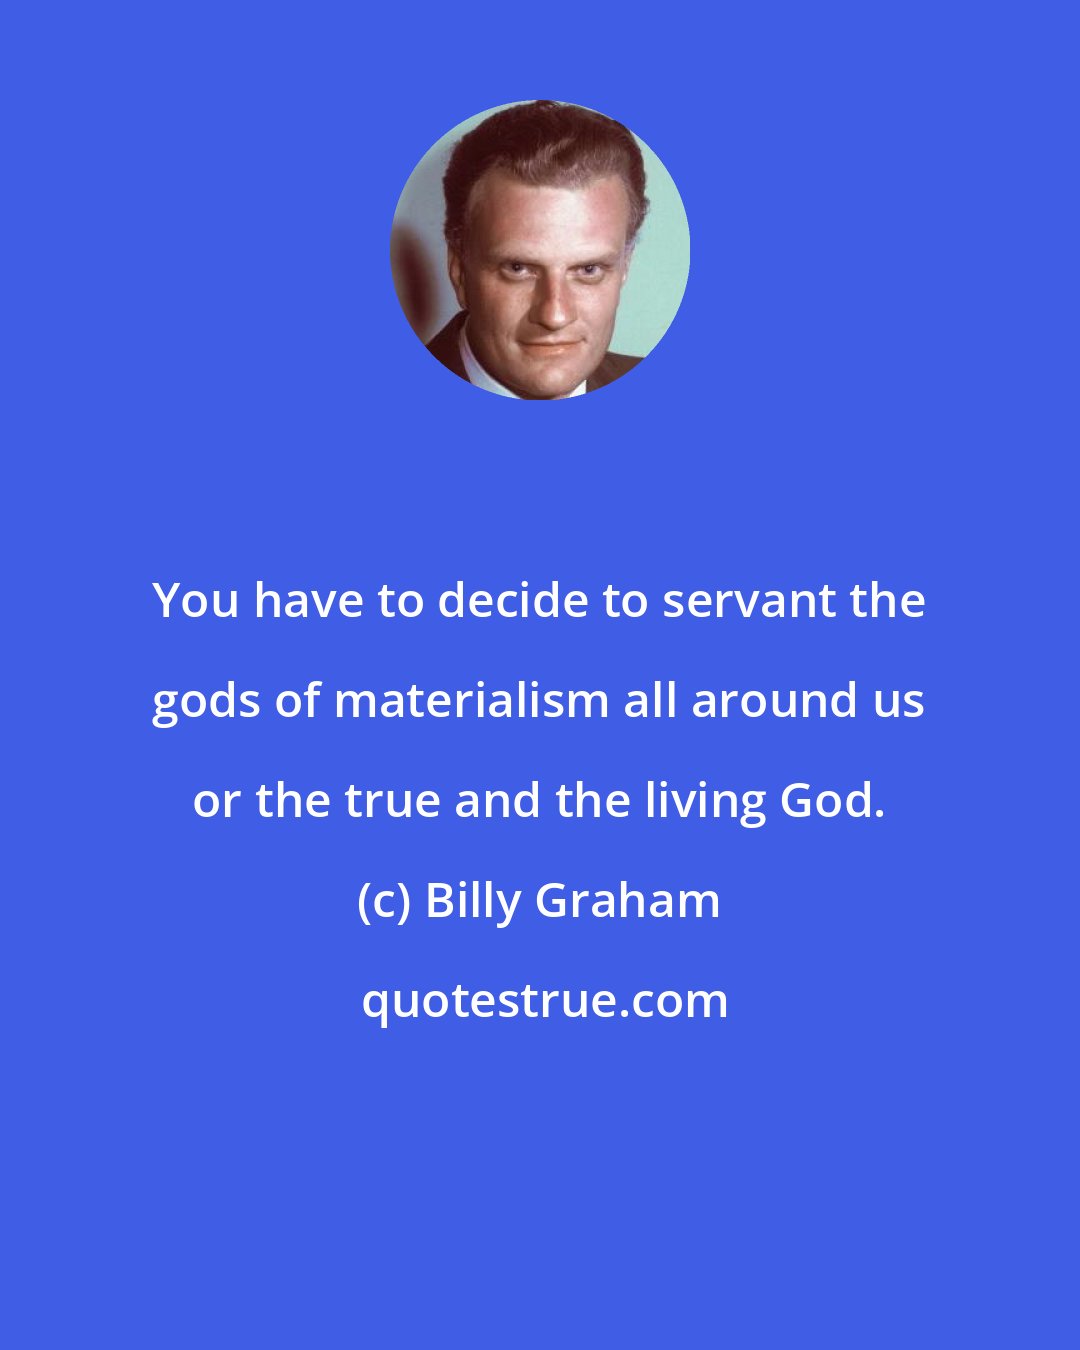 Billy Graham: You have to decide to servant the gods of materialism all around us or the true and the living God.